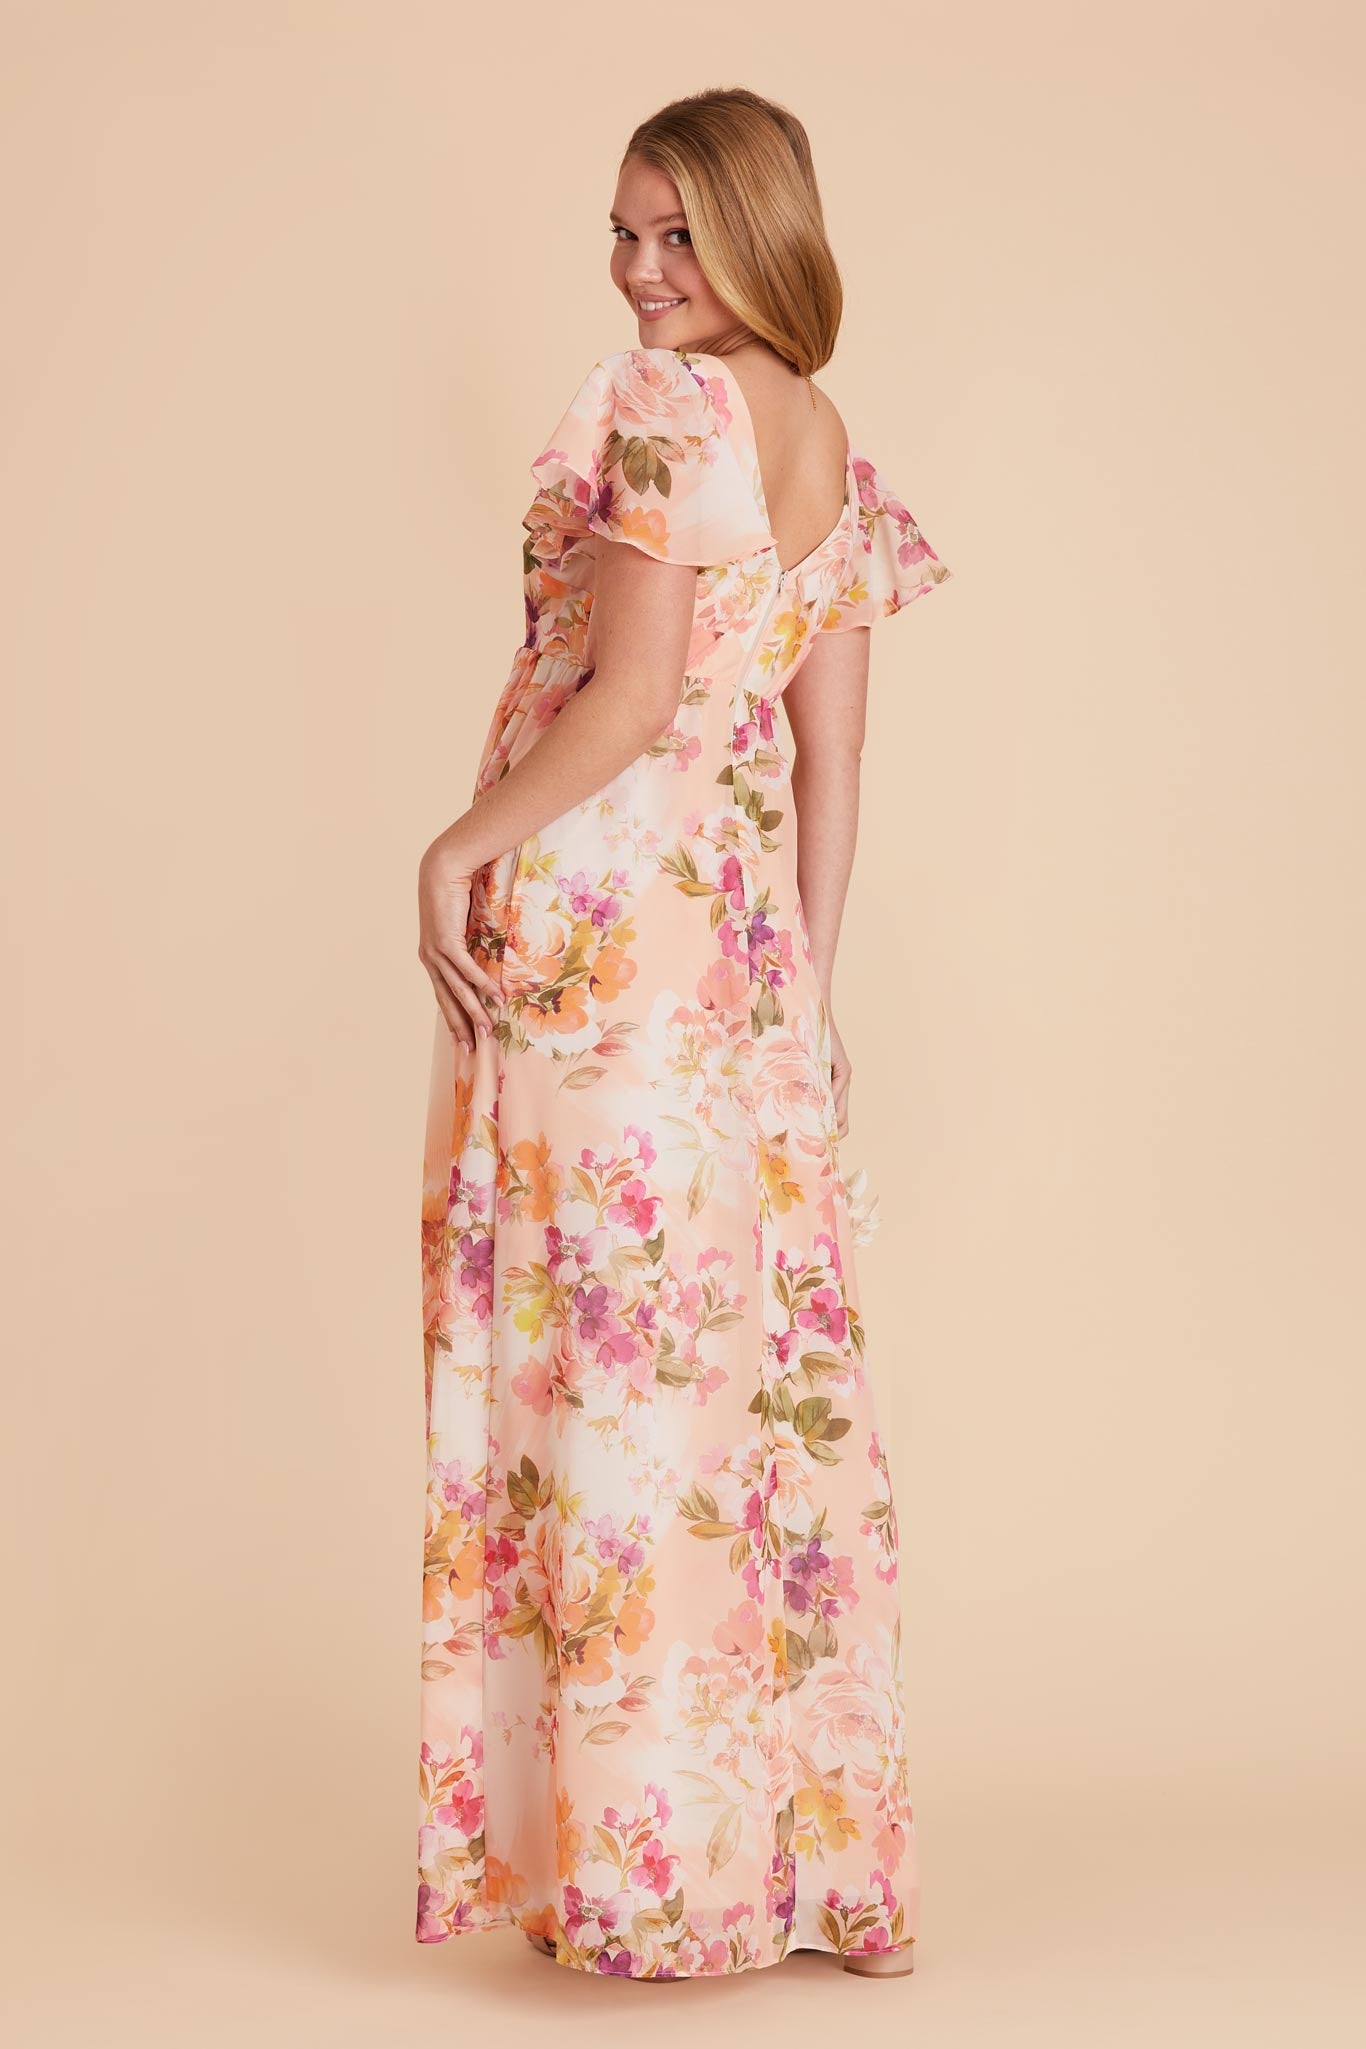 Coral Sunset Peonies Hannah Empire Dress by Birdy Grey